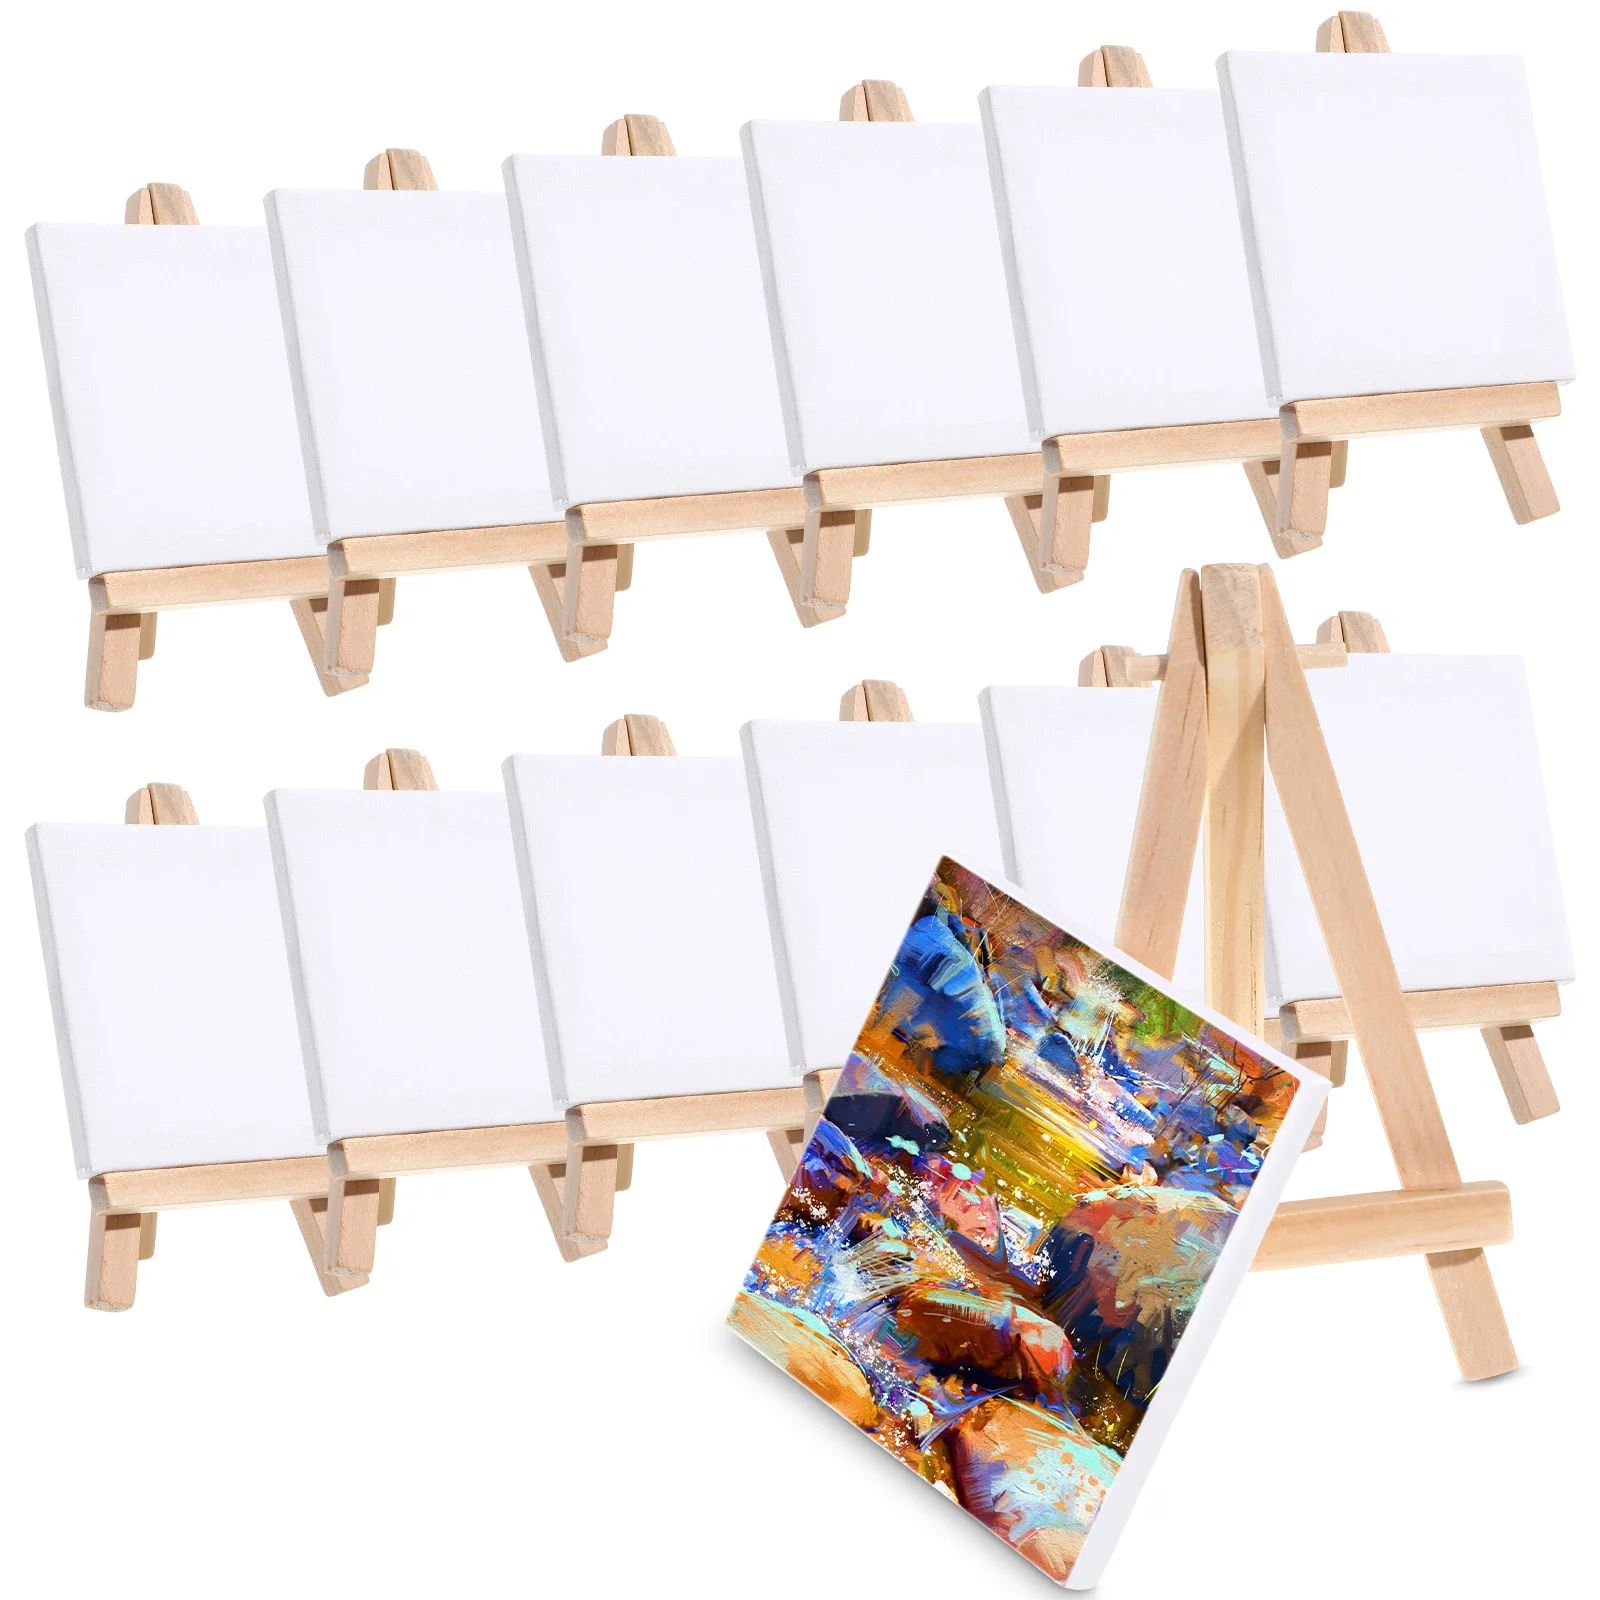 

12 Sets Mini Easels Painting Canvas with Canvas Boards Easel Stands for Blank Art Canvas Boards with Stands Oil Paint Artwork